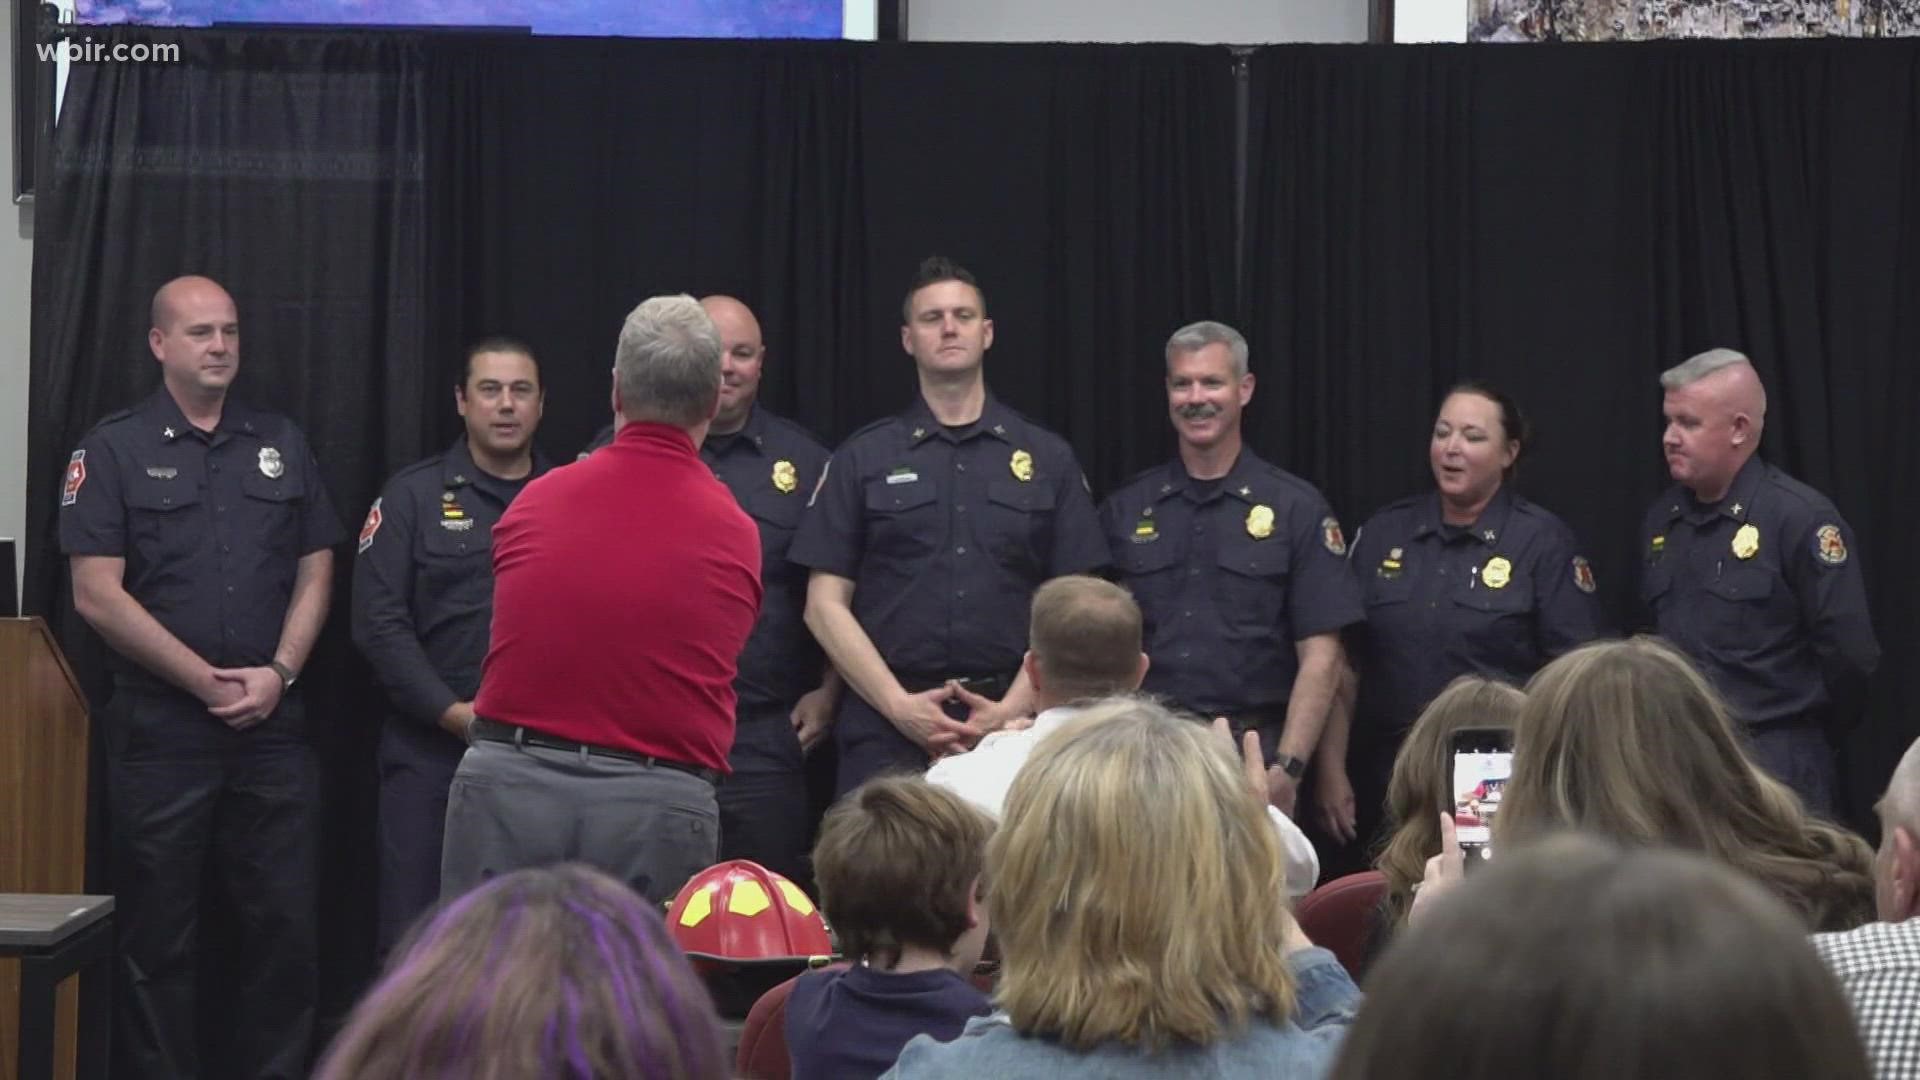 After a promotional ceremony Friday night, David Dyer became one of the Knoxville Fire Department's Master Firefighters.